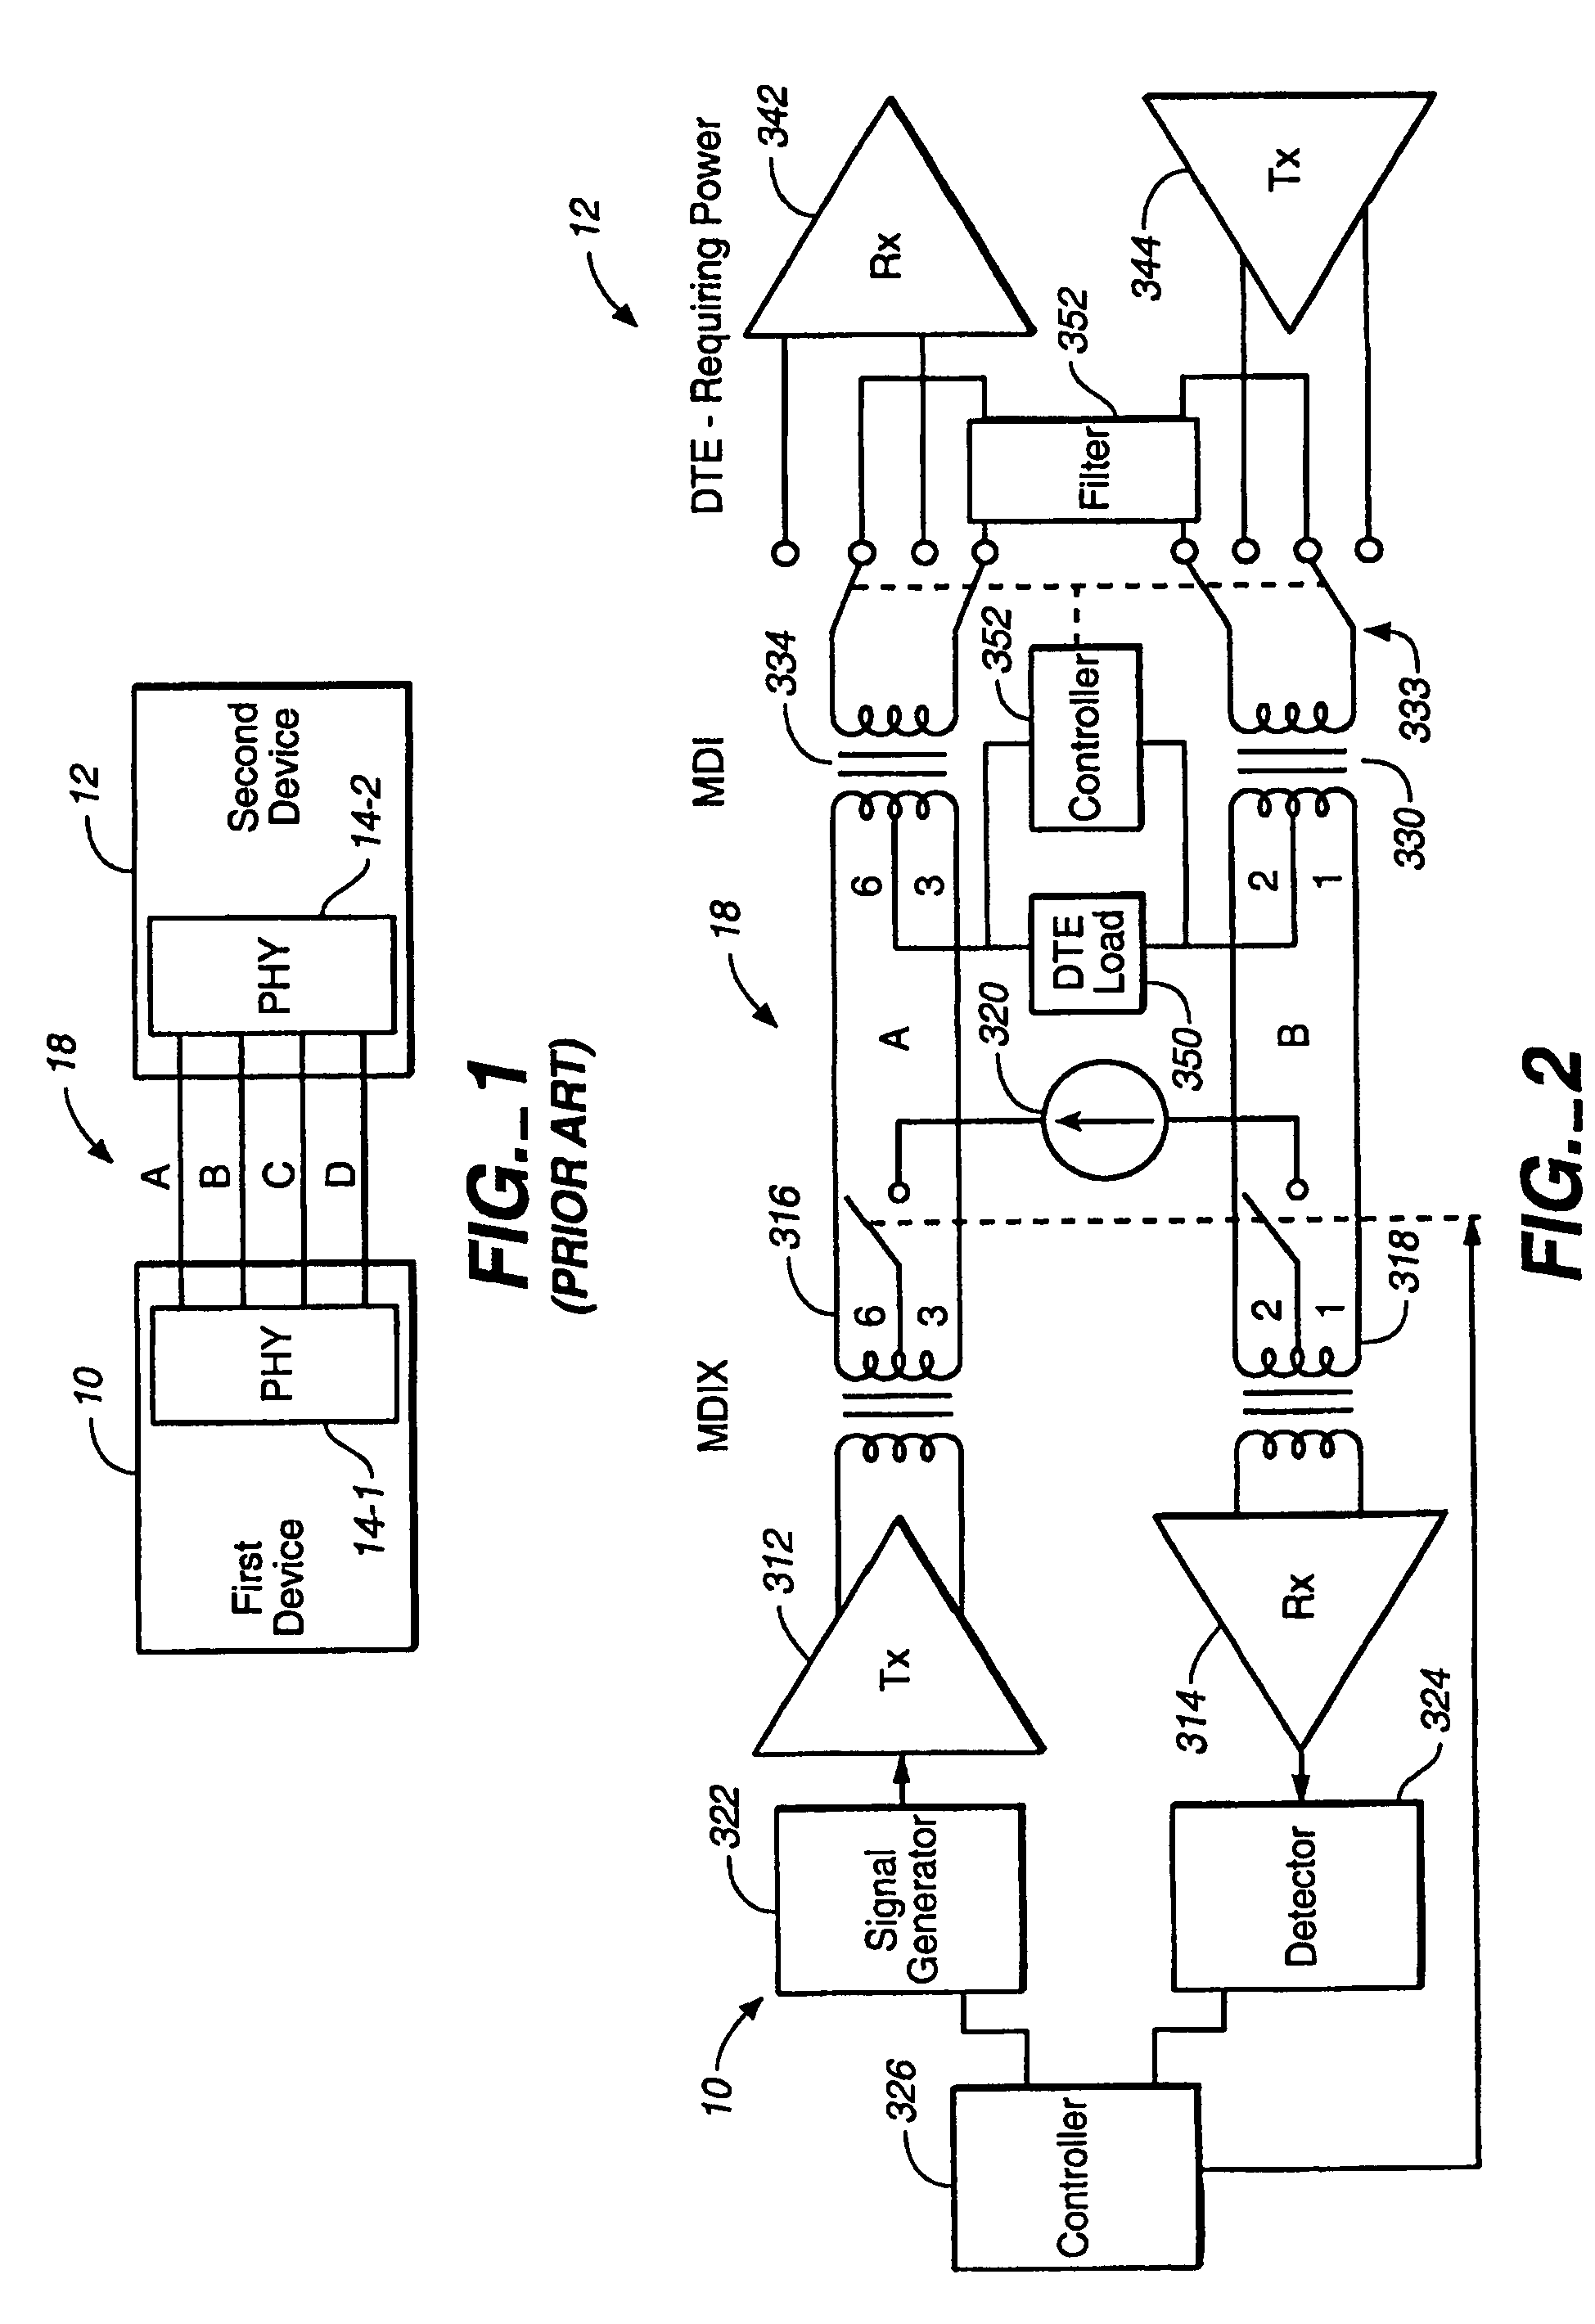 Method and apparatus for autonegotiation between network devices